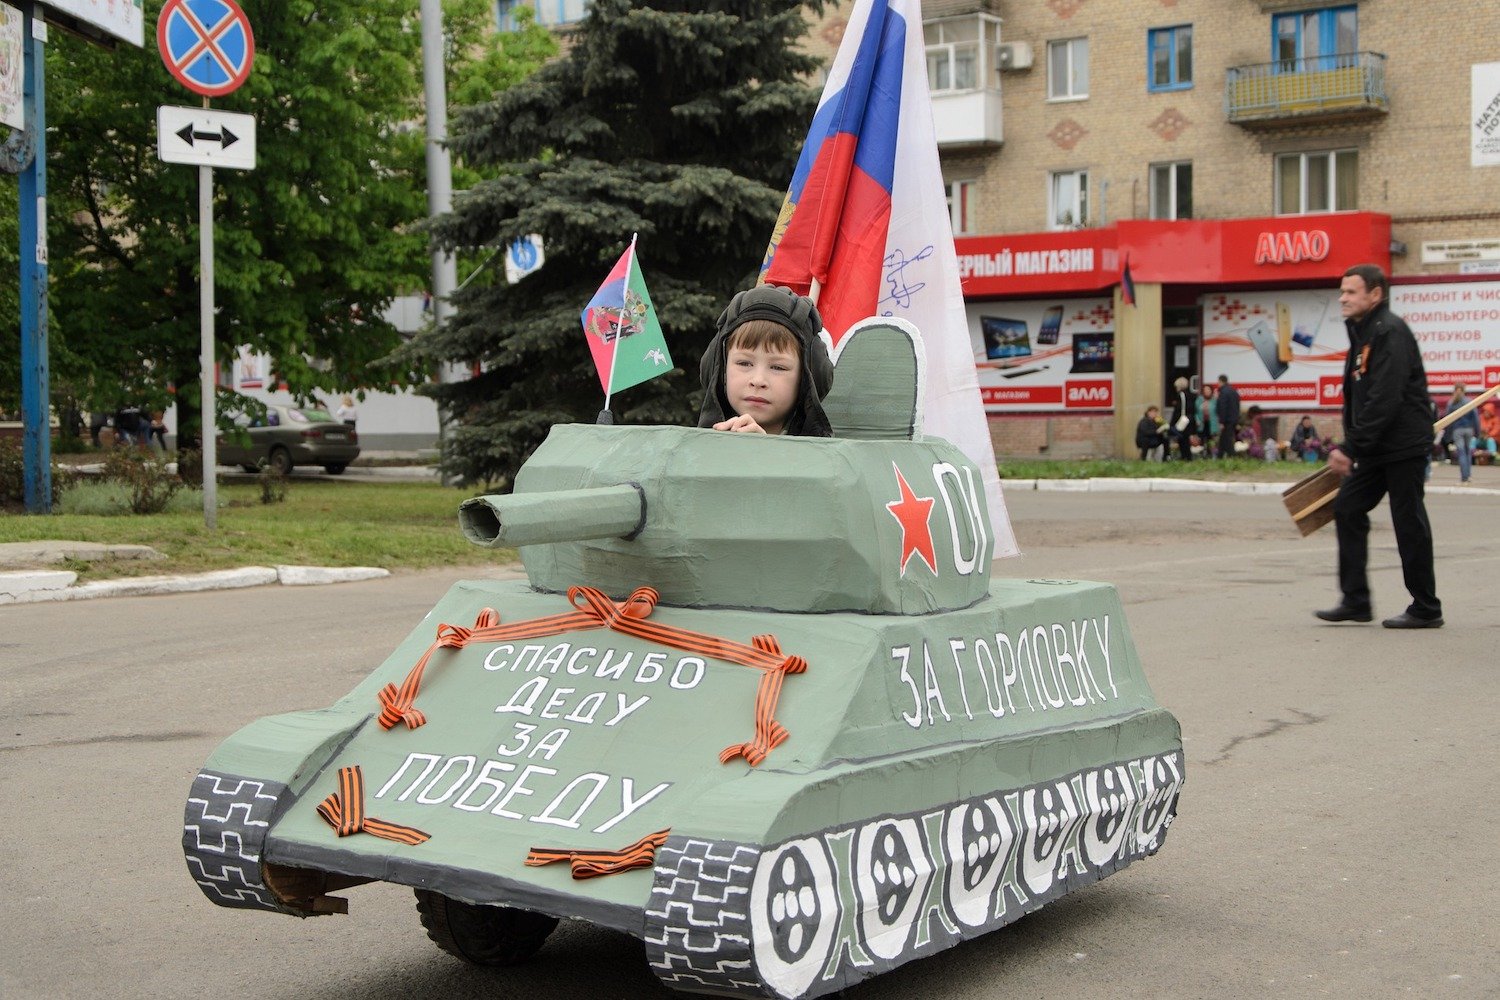 A boy drives a toy tank on Victory Day. The front reads, "Thank you, Grandad, for victory." Image: Don 69/Pixabay under a CC licence.